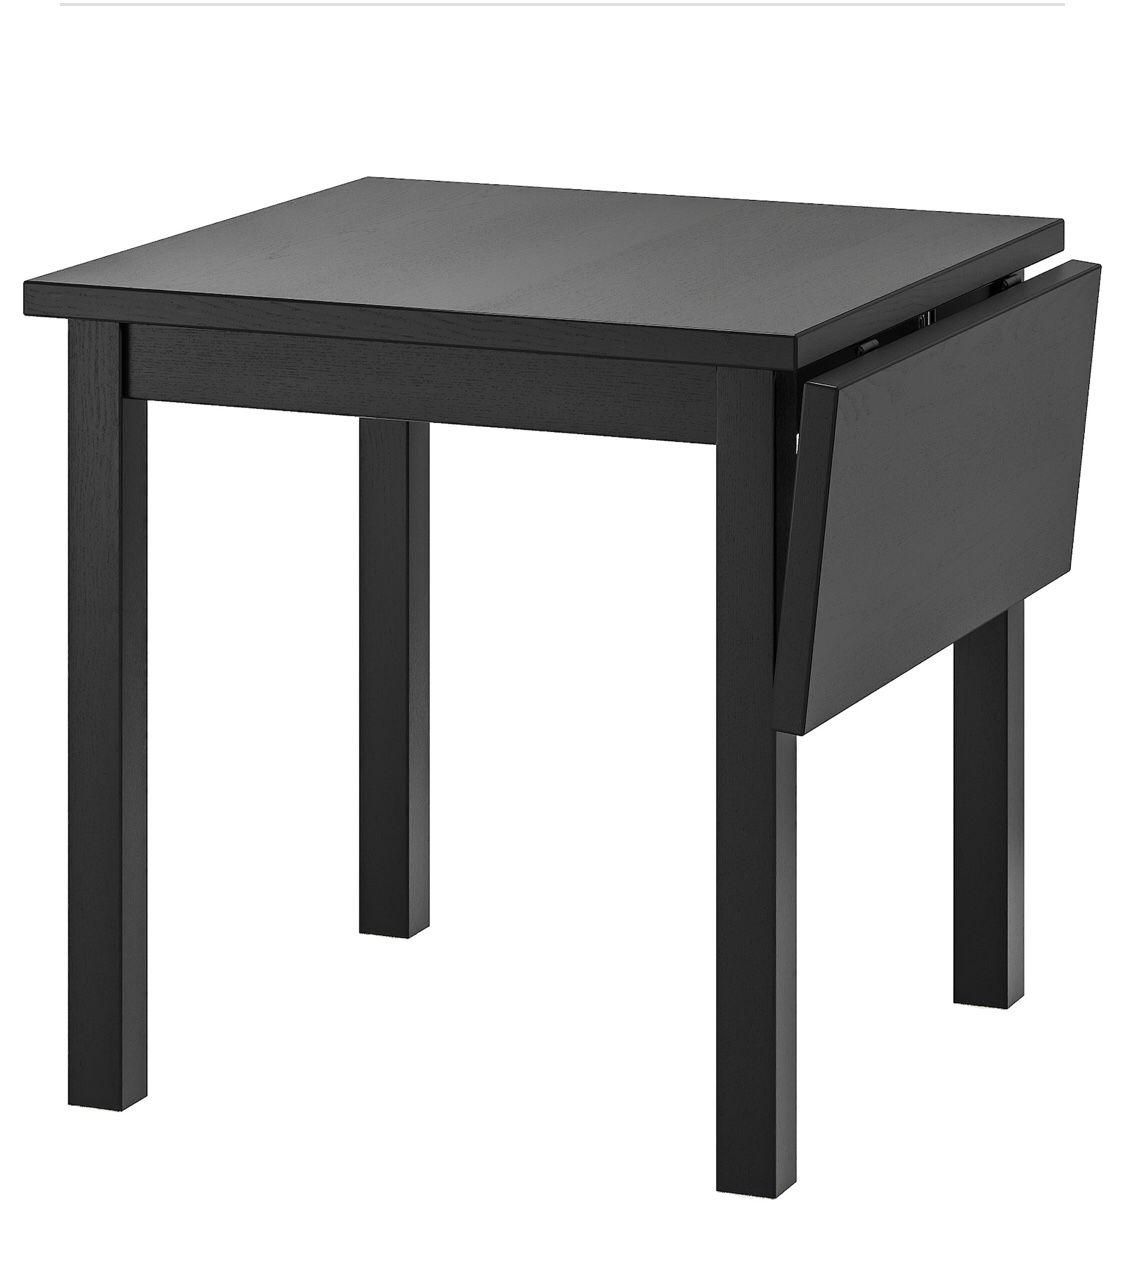 Ikea Dinner Table With 2 Chairs